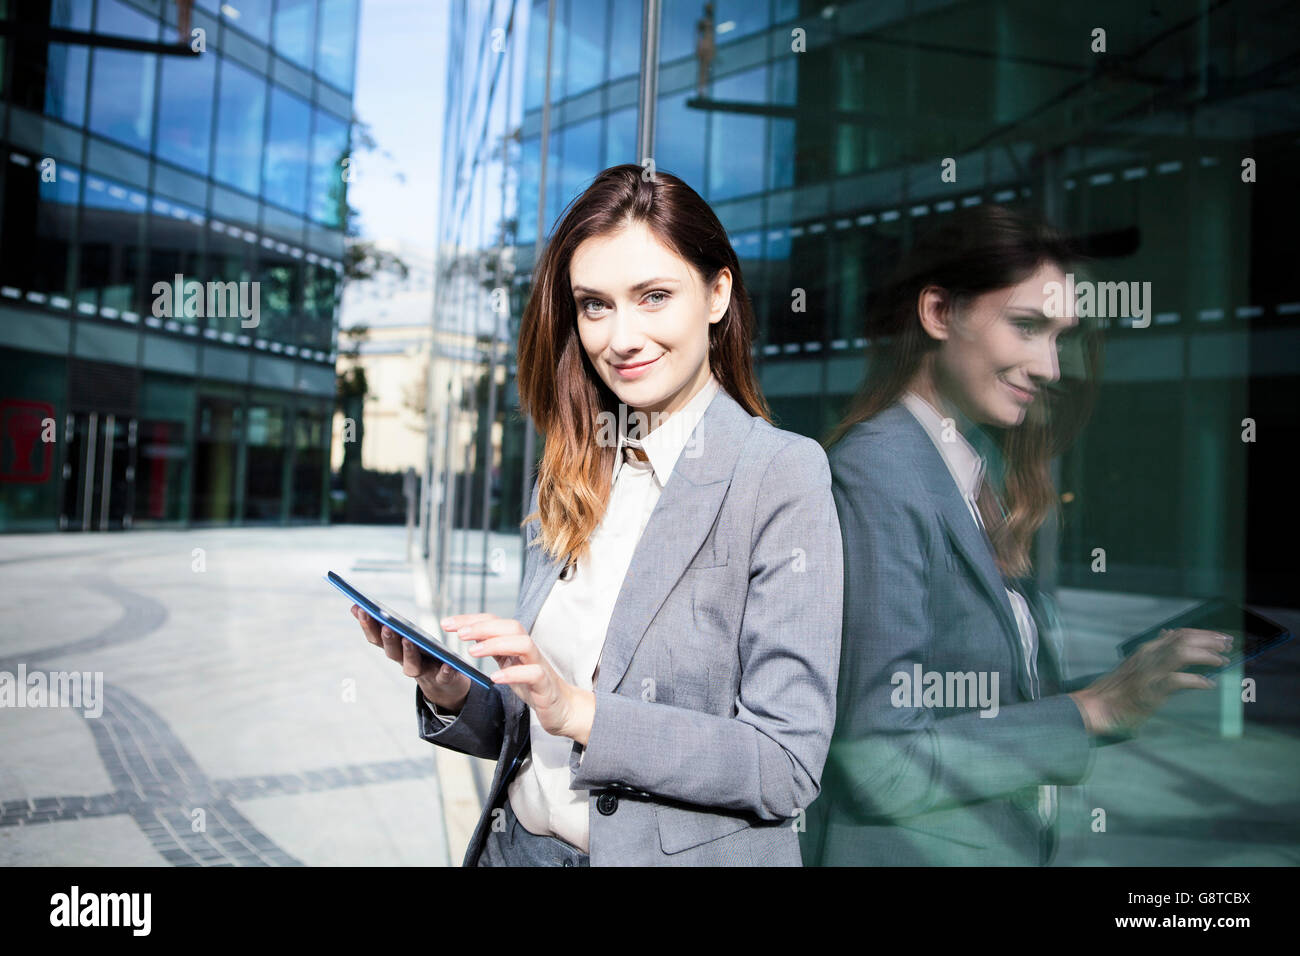 Business woman using digital tablet in city Stock Photo